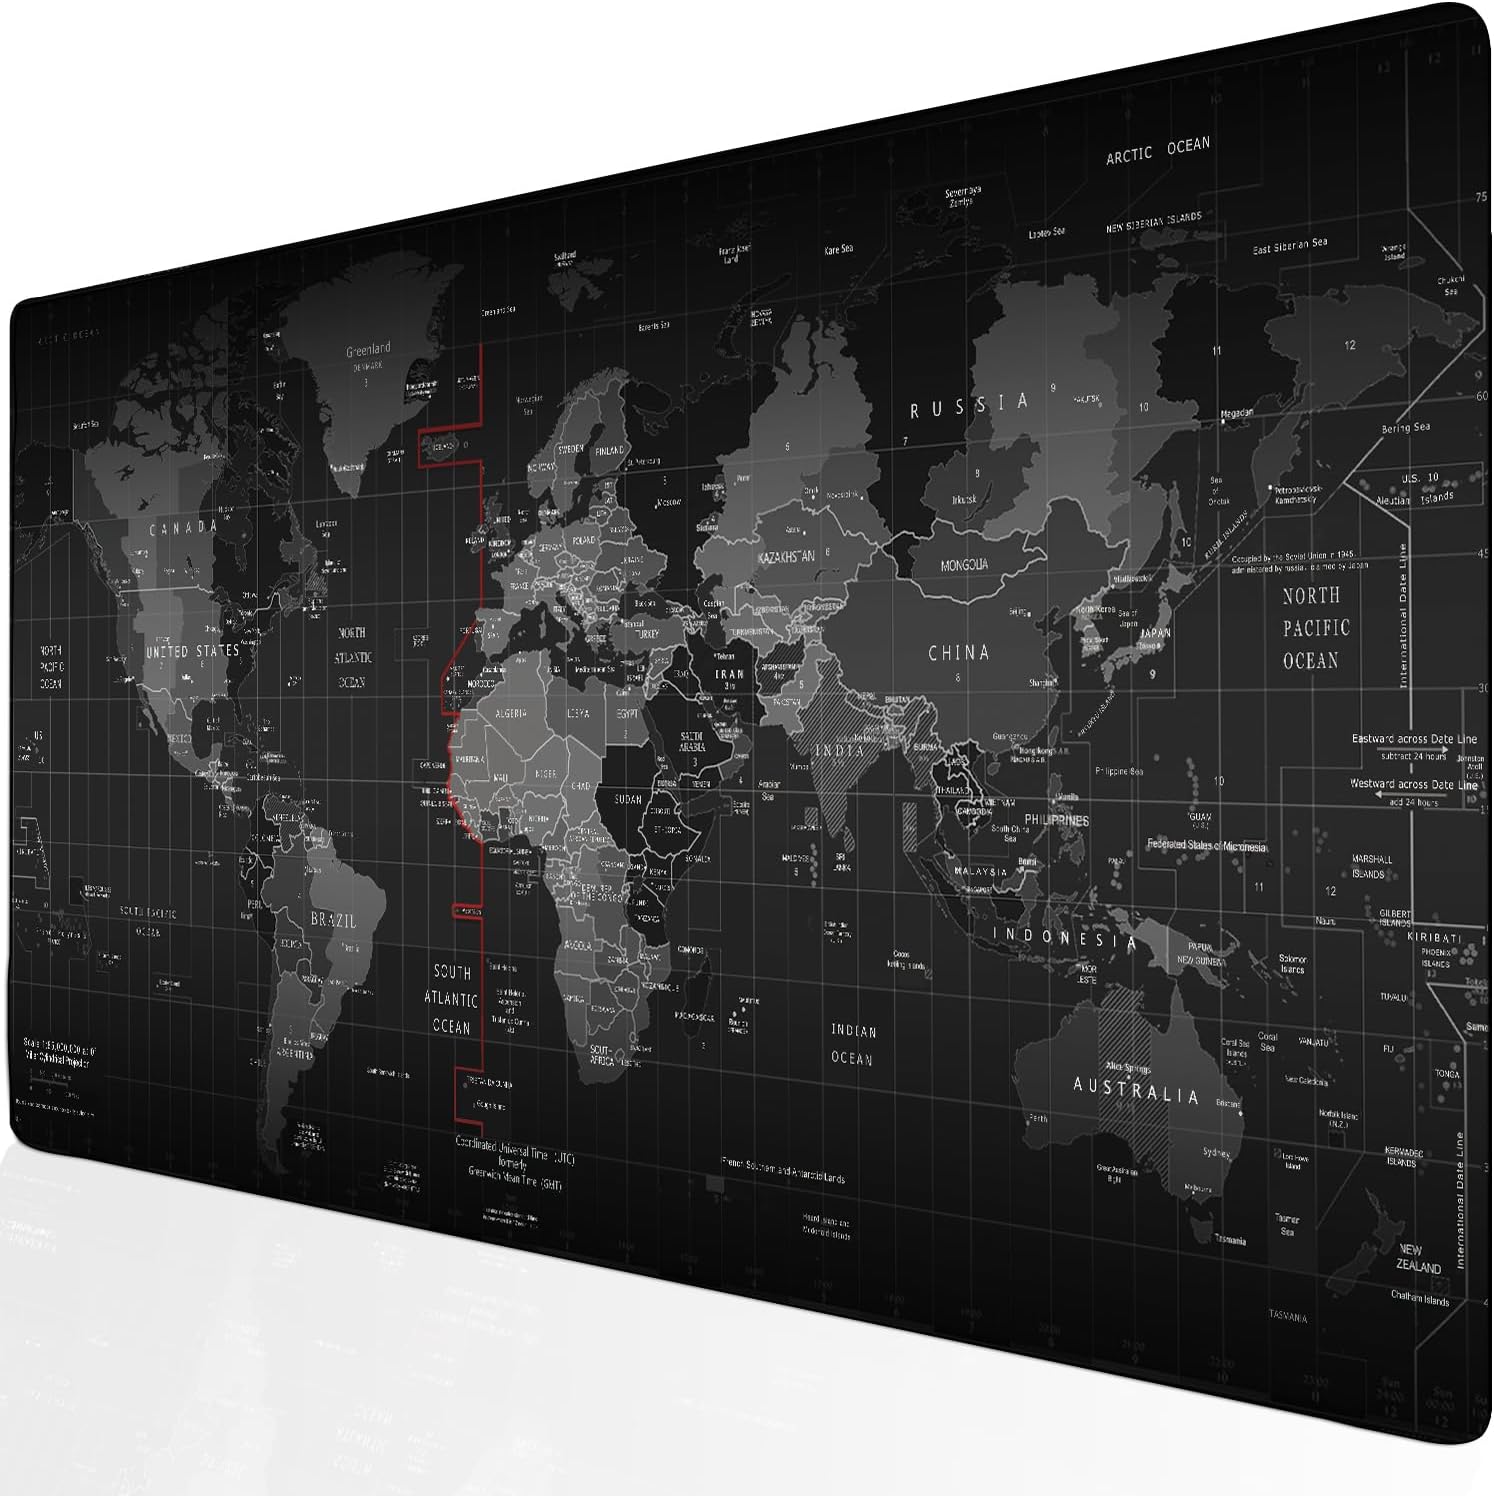 Imegny Gaming Mouse Pad, Oversized Mouse Mat Natural Rubber Blank Desk Mat Heavy Duty, Water Resistant Keyboard Pad for Gamer, Office and Home Use (90x40 map)